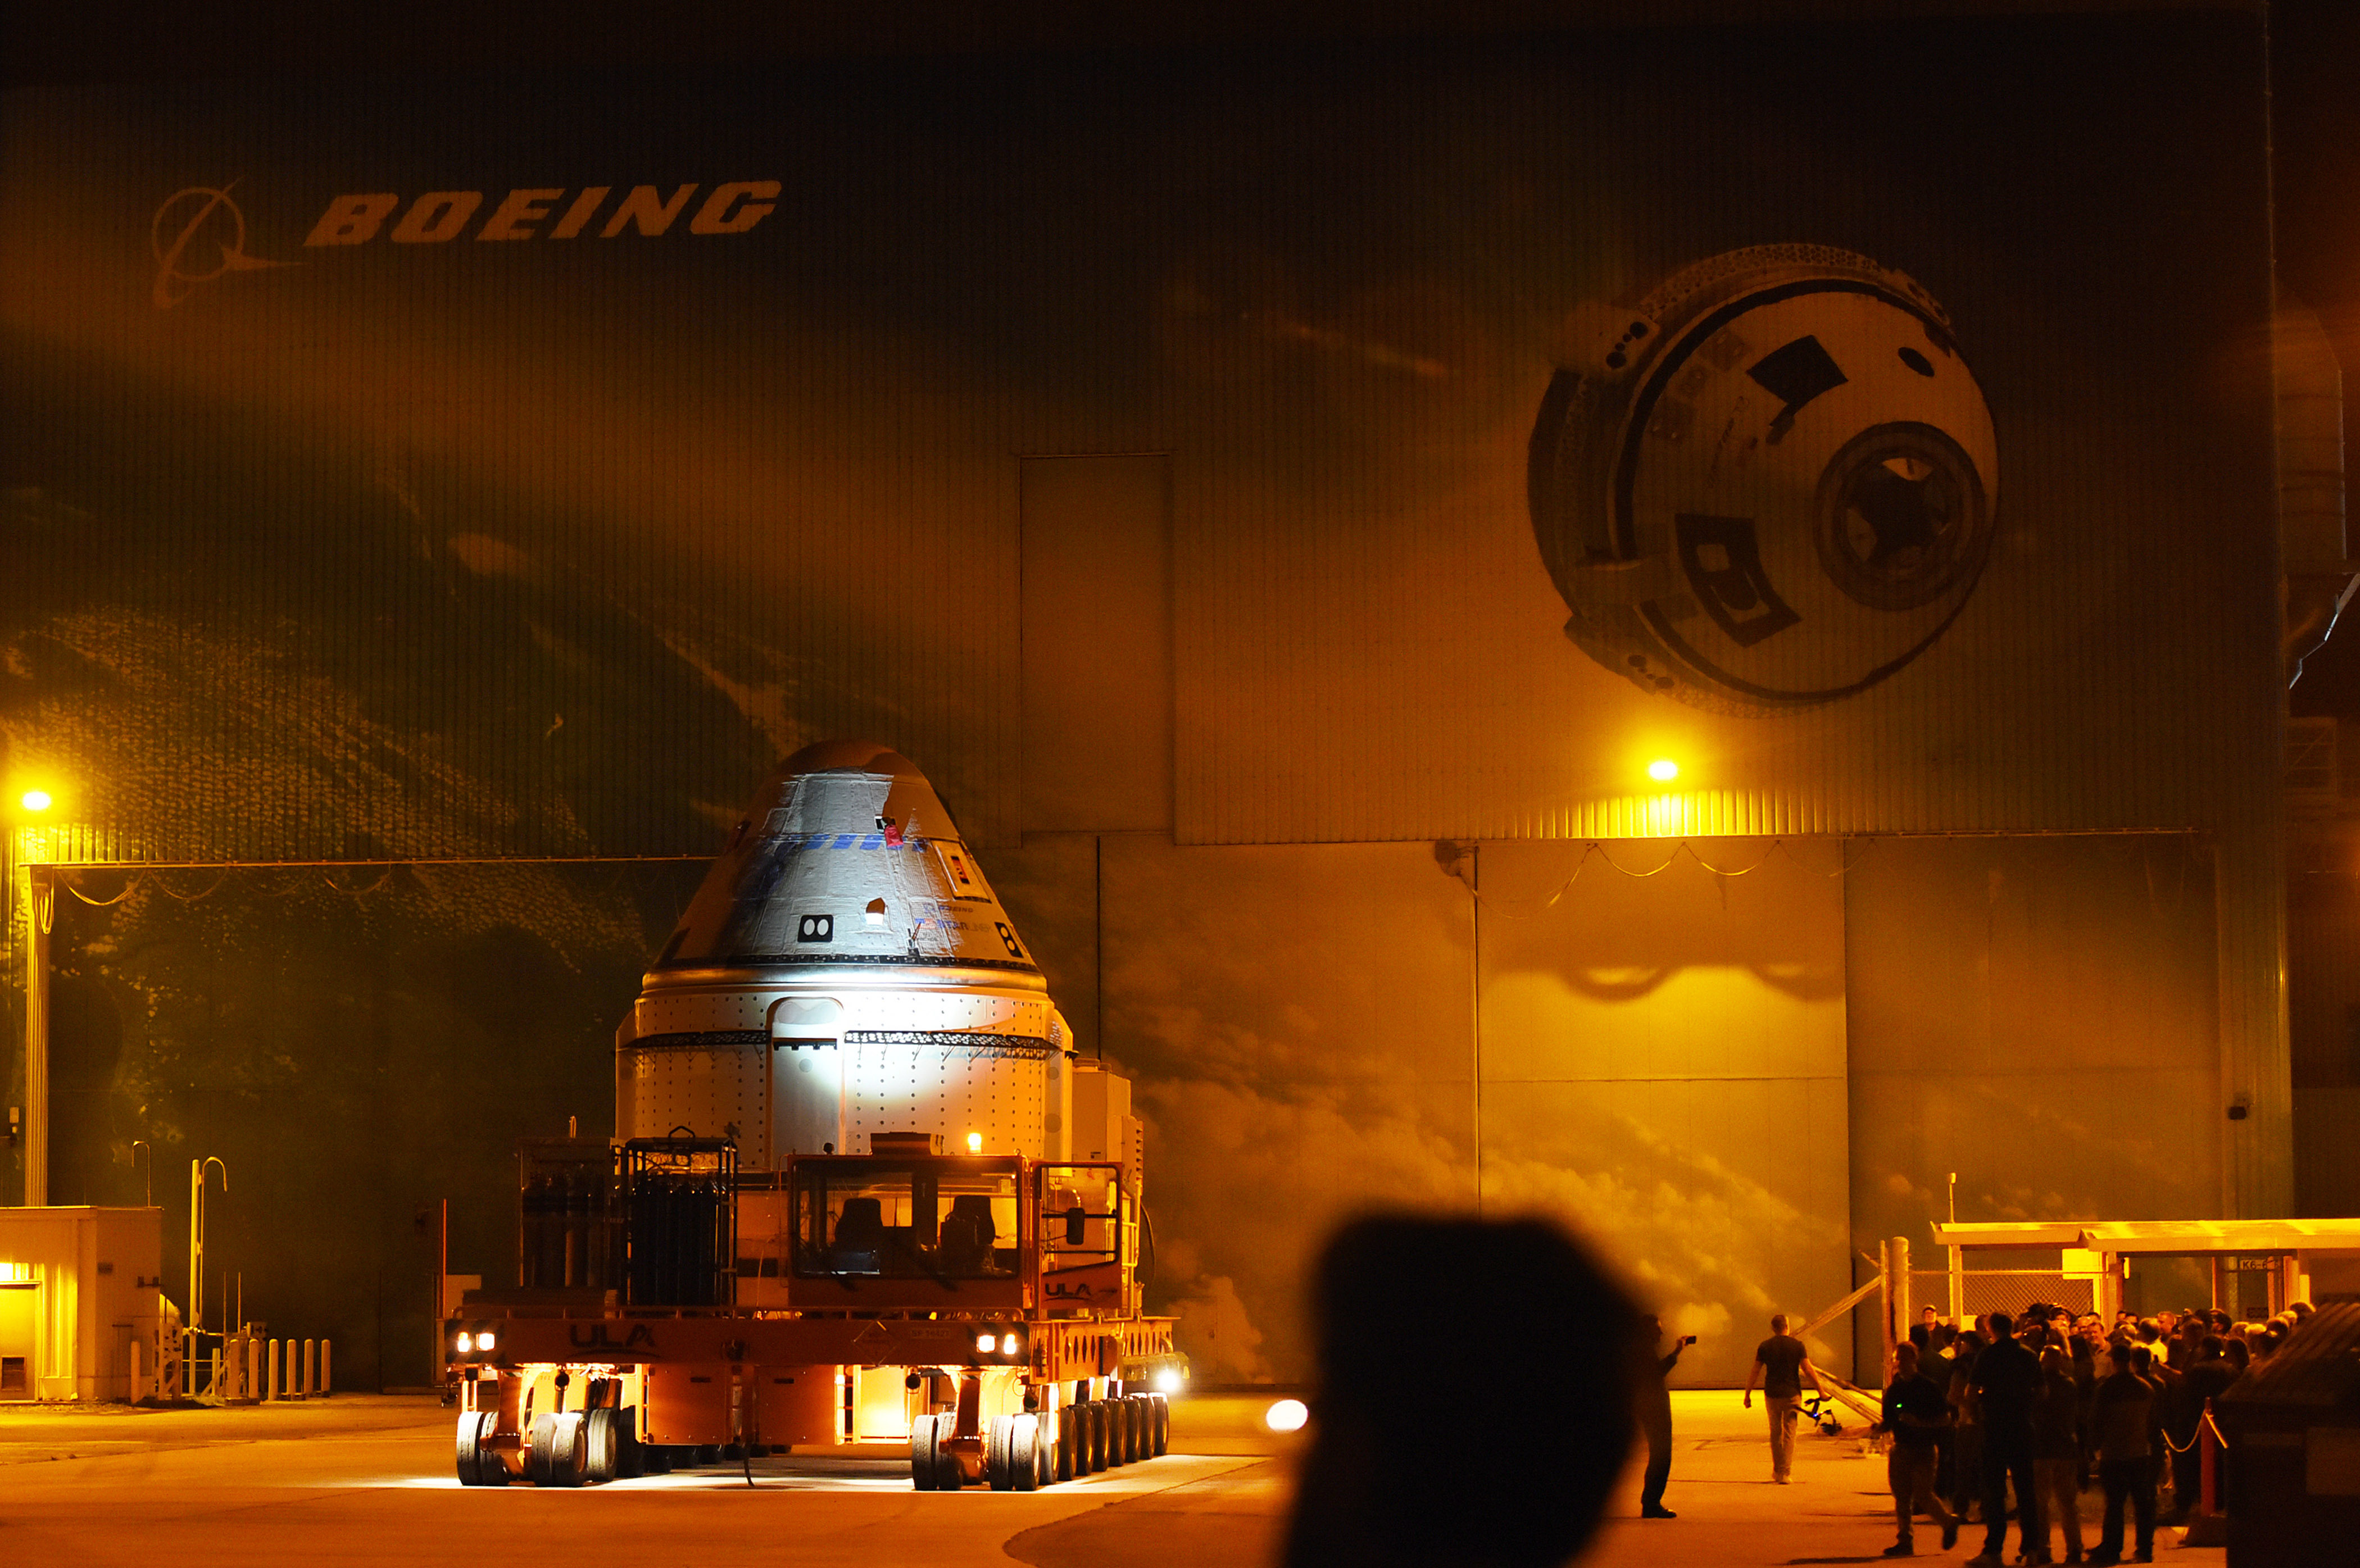 <p>Boeing's CST-100 Starliner spacecraft was rolled out of the Commercial Crew and Cargo Processing Facility at the Kennedy Space Center to be transported to pad 41 at Cape Canaveral Space Force Station in Cape Canaveral, Florida, on April 16, 2024. </p><p>Starliner is scheduled for its first crewed launch to the International Space Station on a ULA Atlas V rocket with NASA astronauts Suni Williams and Butch Wilmore on May 6, 2024.</p>